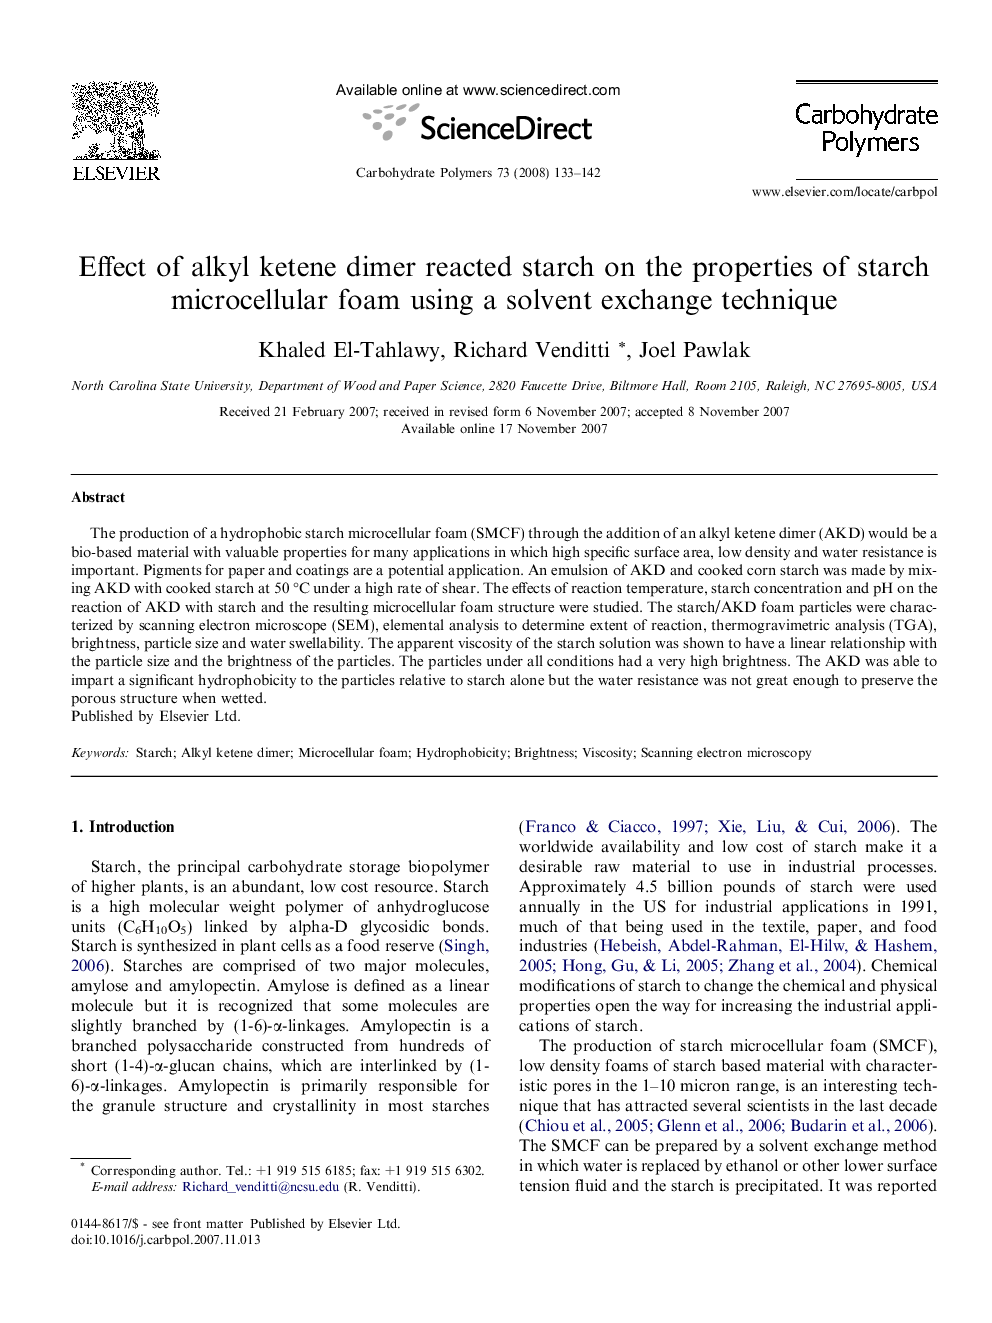 Effect of alkyl ketene dimer reacted starch on the properties of starch microcellular foam using a solvent exchange technique